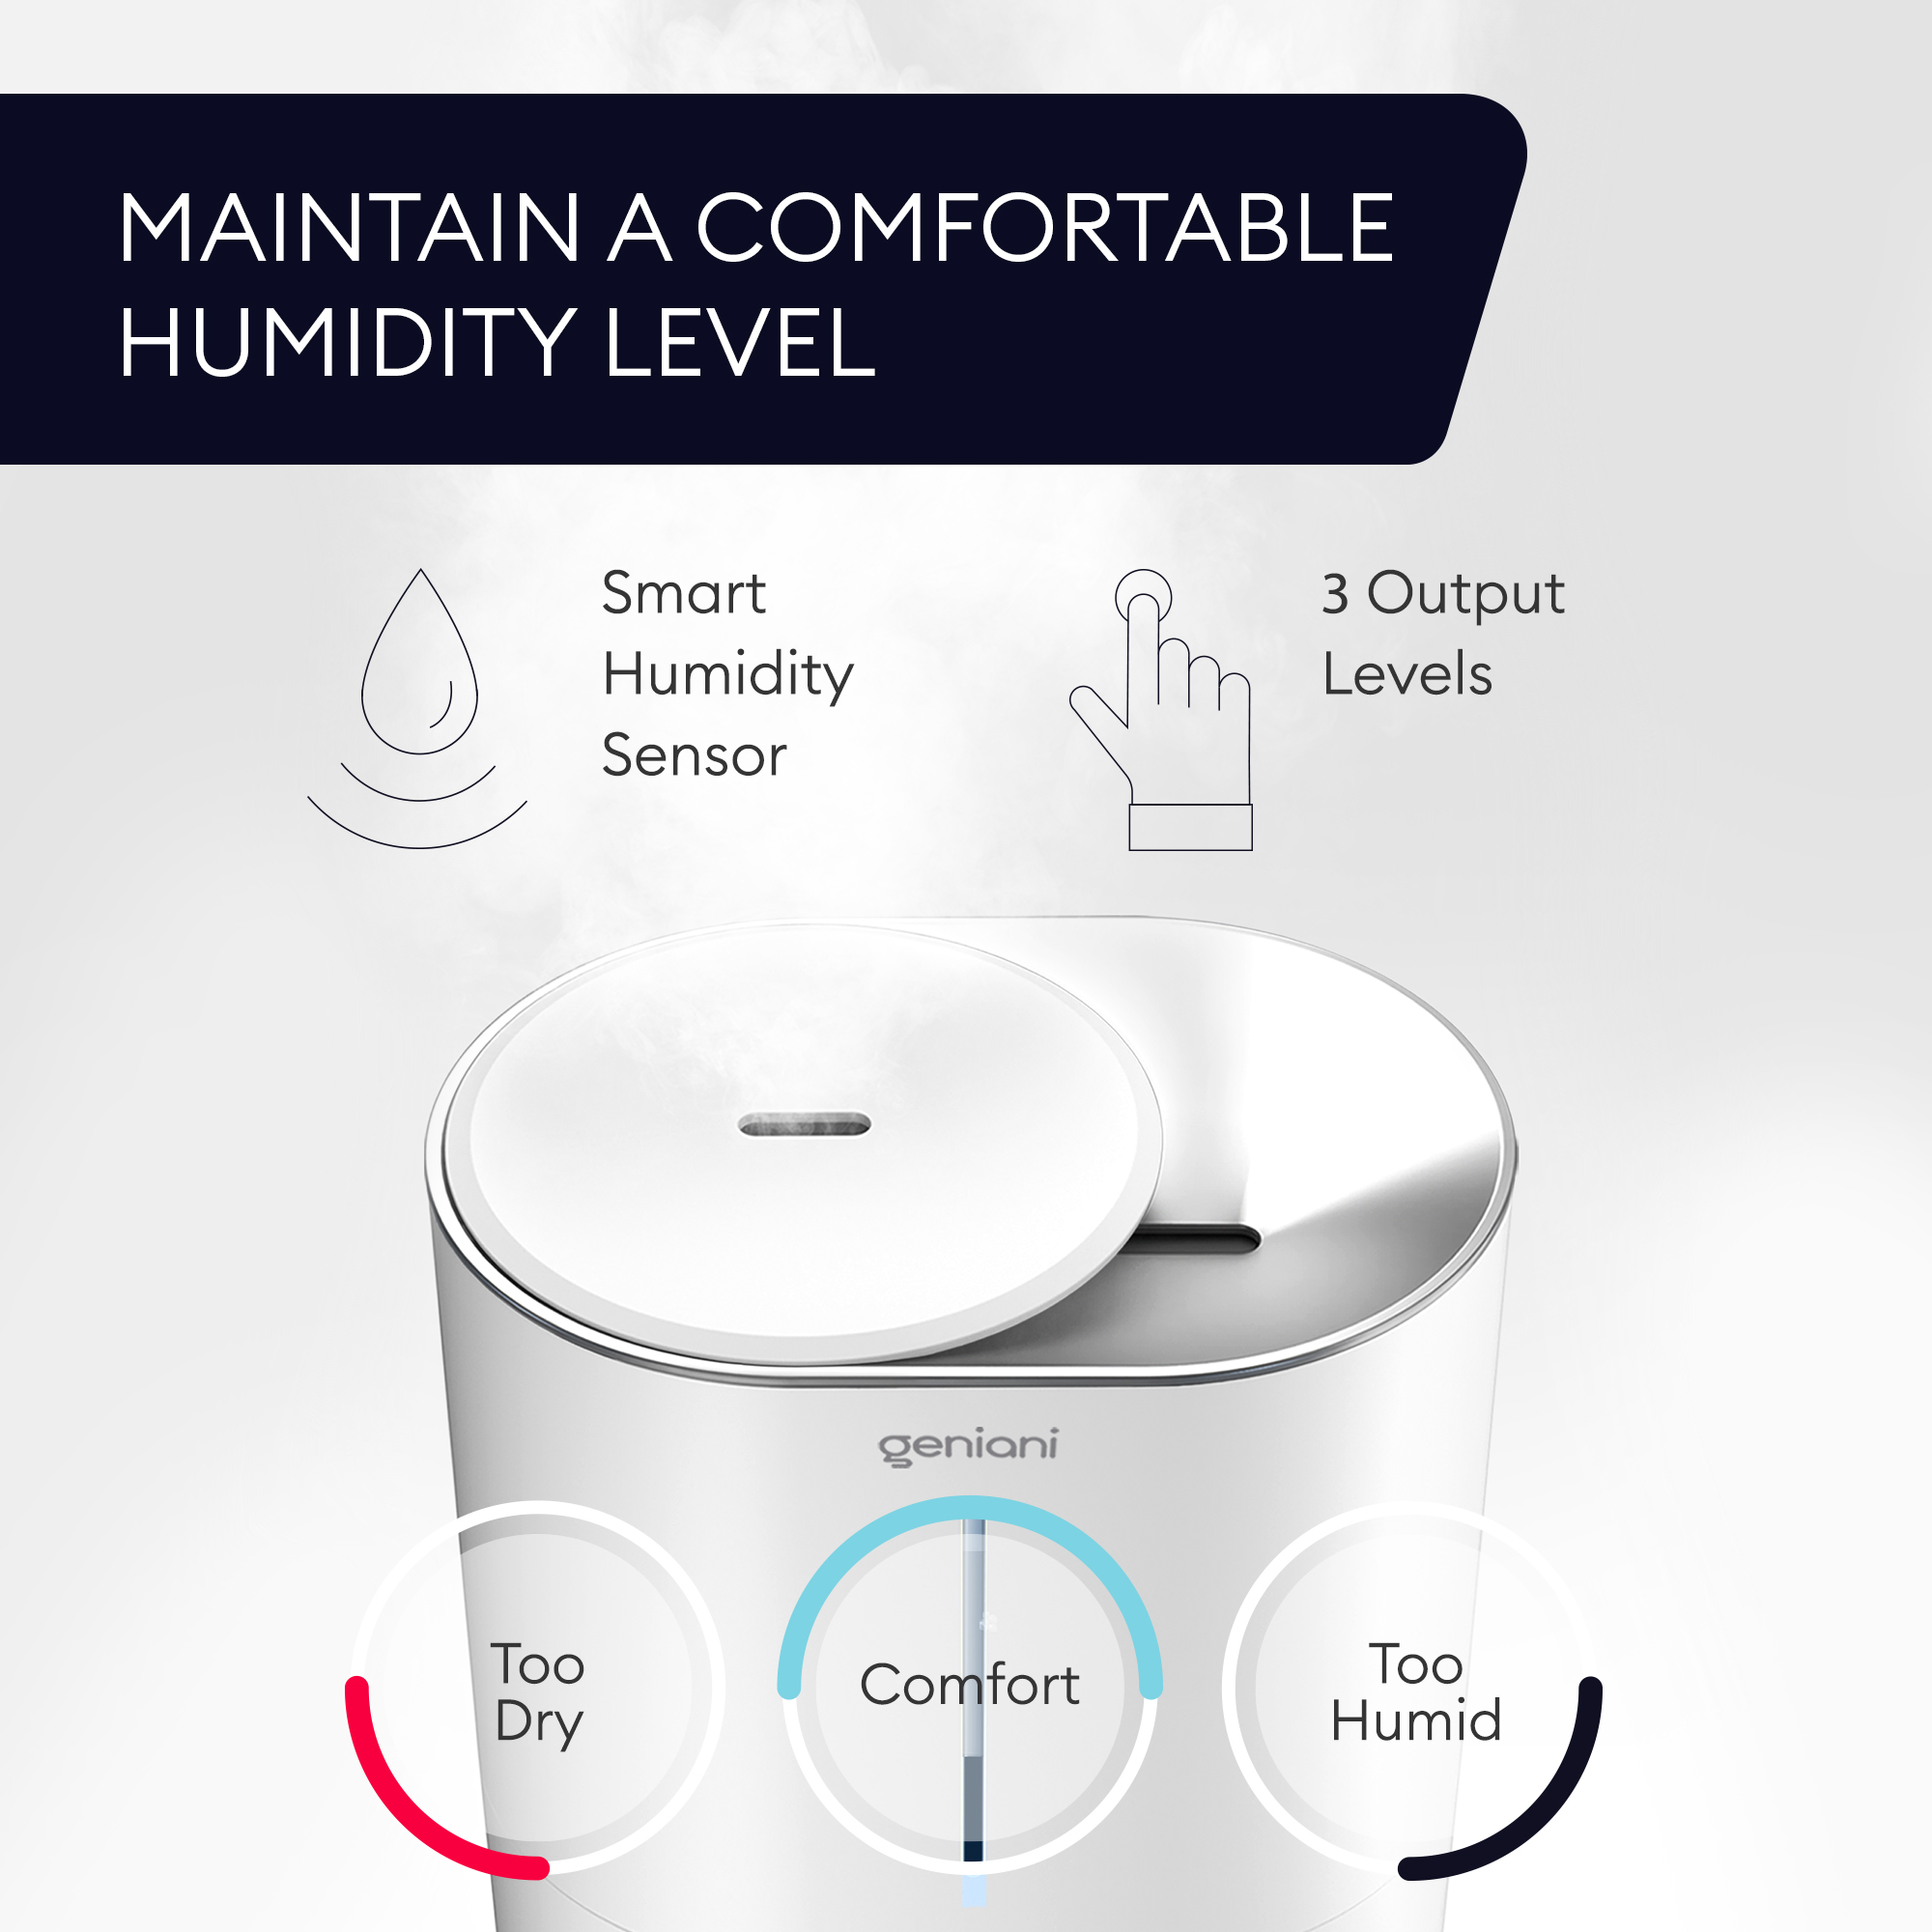 𝐋𝐚𝐫𝐠𝐞 𝐂𝐚𝐩𝐚𝐜𝐢𝐭𝐲 Top Fill Cool Mist Large Humidifier & Essential Oil Diffuser for Home - Smart Aroma Ultrasonic Air Humidifier for Bedroom, Baby, Kids, Plants - Auto Shut Off, 376 sqf - image 5 of 8